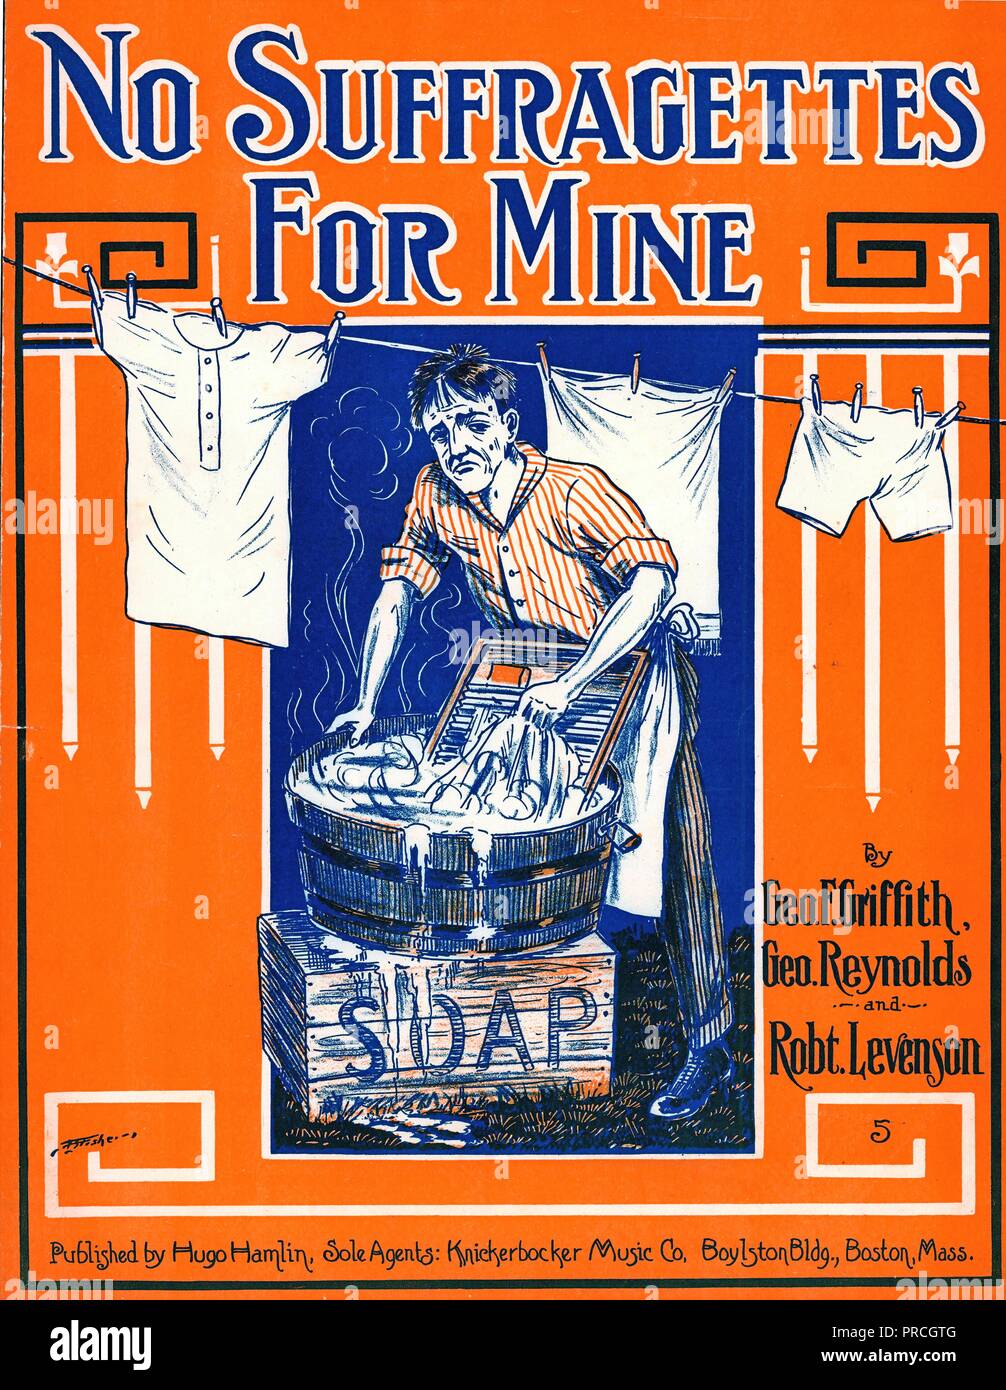 Sheet music cover for the anti-suffrage song 'No Suffragettes For Mine,' with blue text, an orange background, and an image of a man, unhappily laboring over a washing tub, published in Boston, Massachusetts by Hugo Hamlin, and sold by Knickerbocker Music company, for the American market, 1905. () Stock Photo